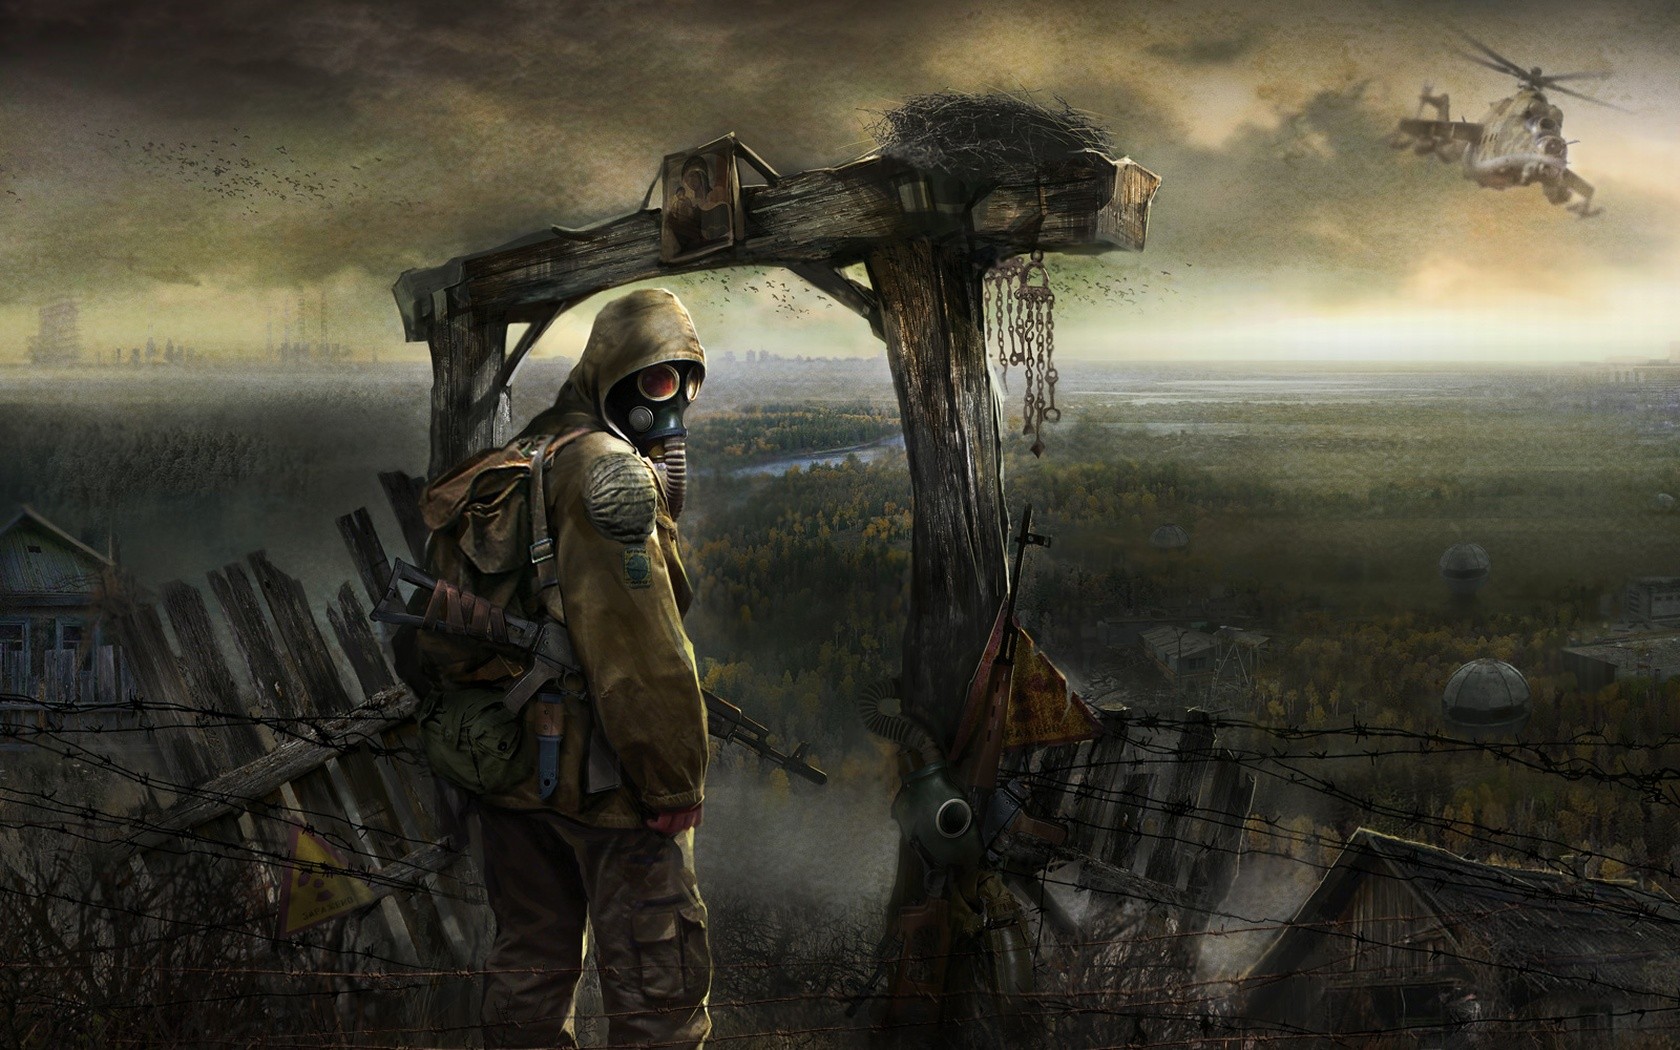 General 1680x1050 apocalyptic artwork gas masks S.T.A.L.K.E.R. S.T.A.L.K.E.R.: Shadow of Chernobyl video games PC gaming video game art